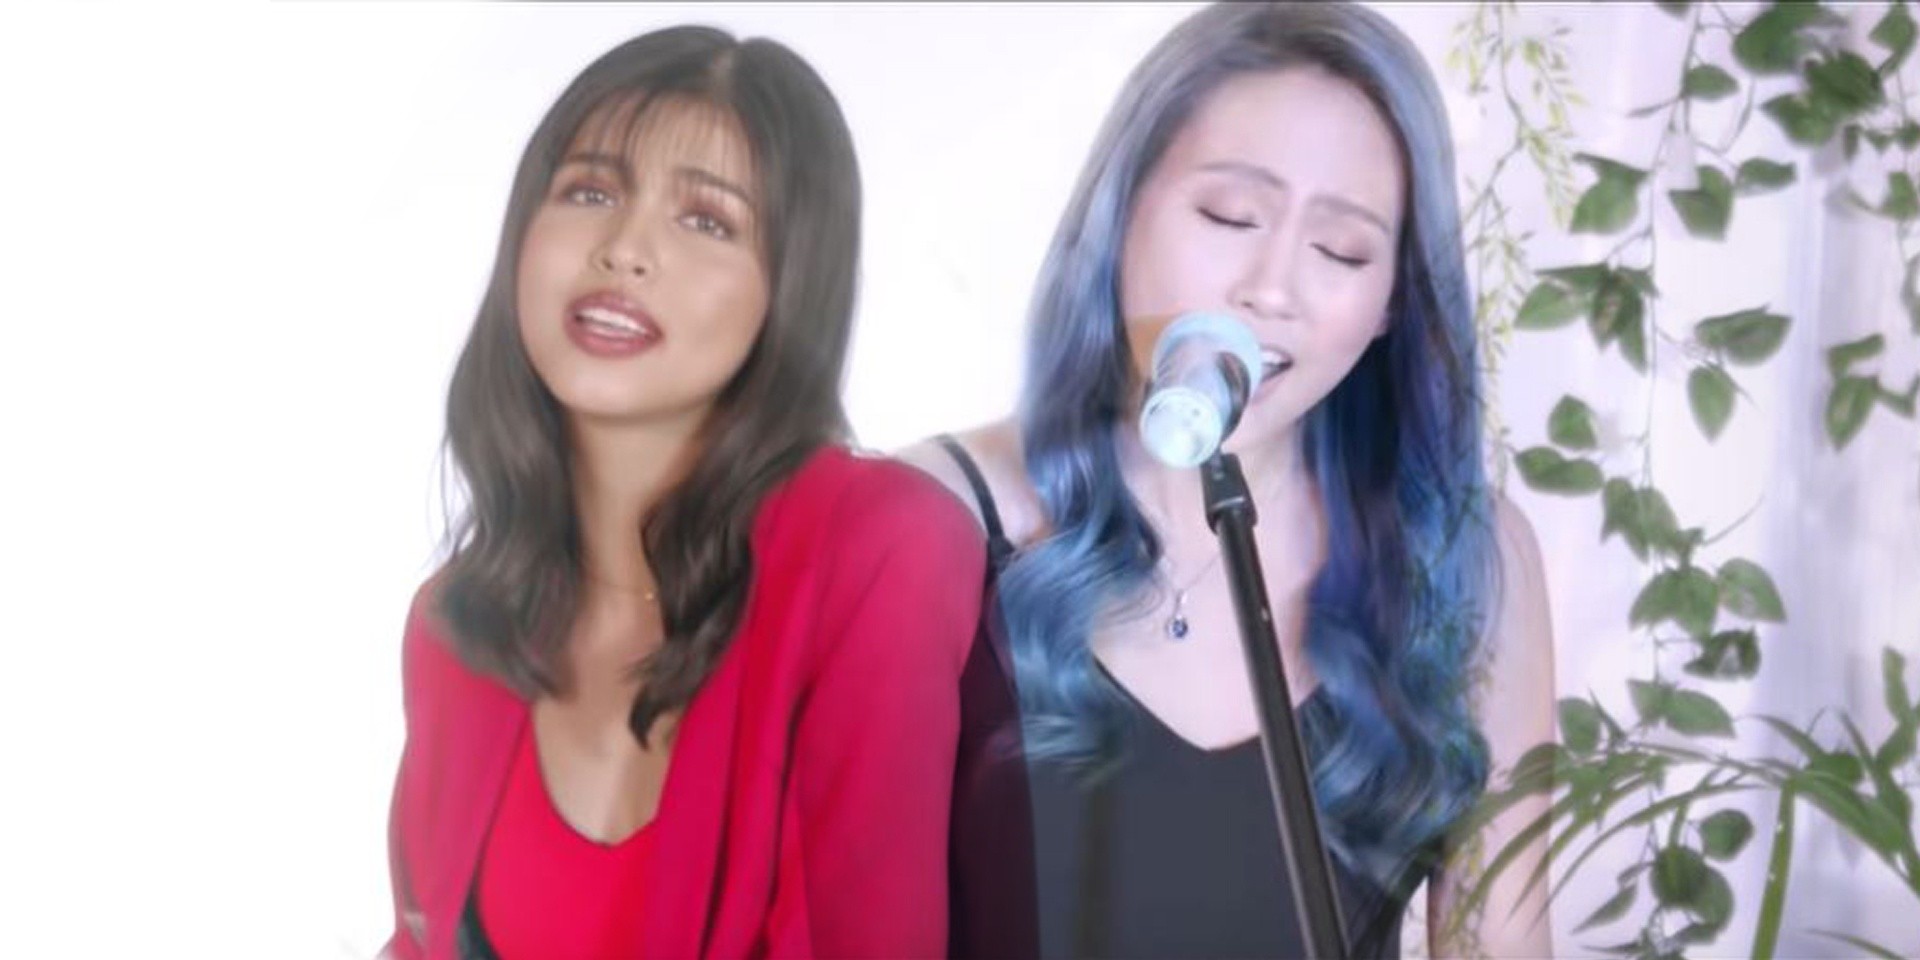 Maine Mendoza makes her music debut with Gracenote and their collab 'Parang Kailan Lang' – watch